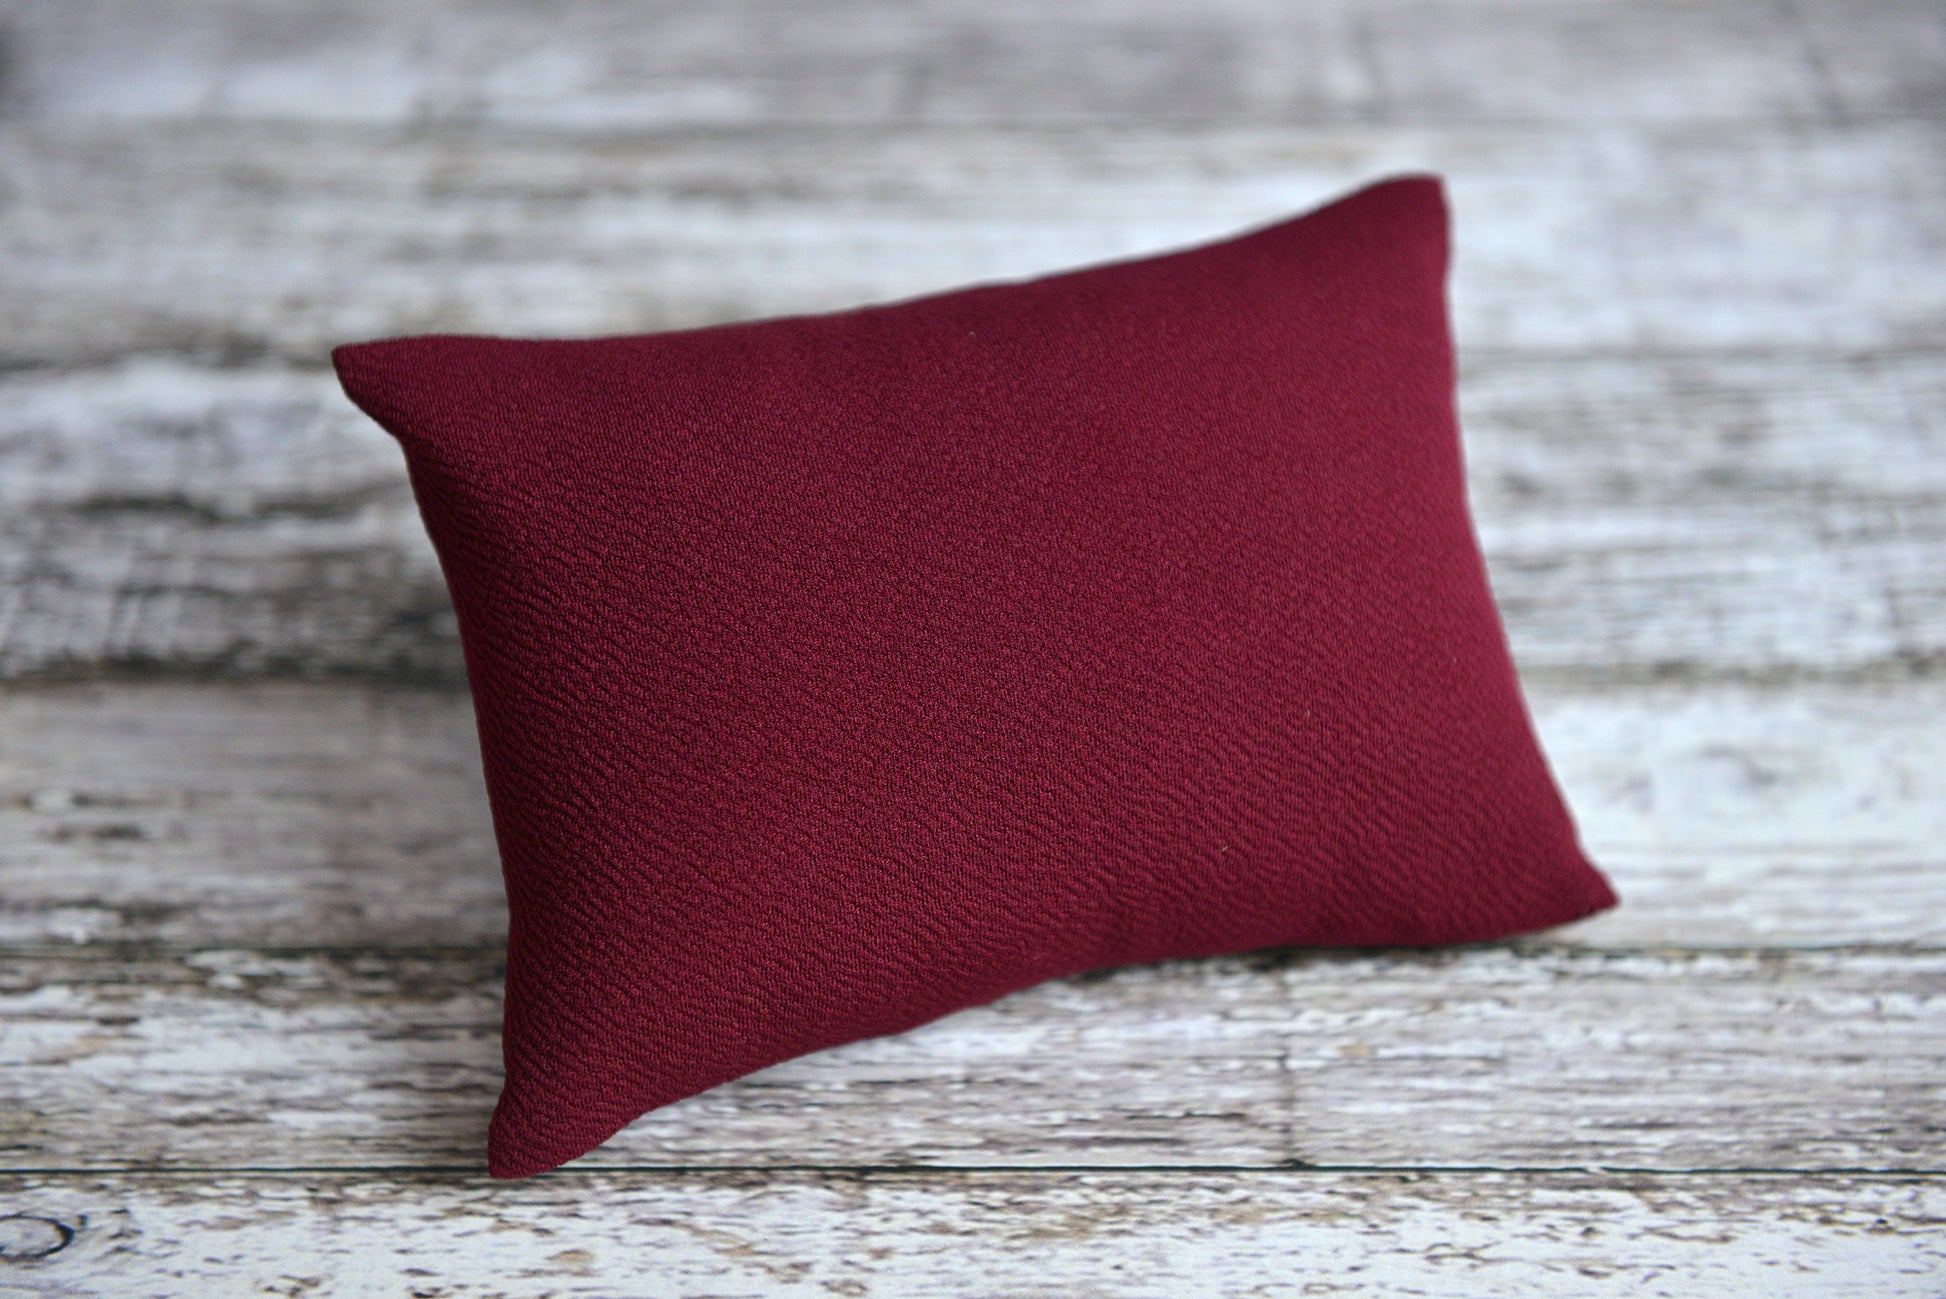 Mini Pillow with Cover - Textured - Burgundy-Newborn Photography Props